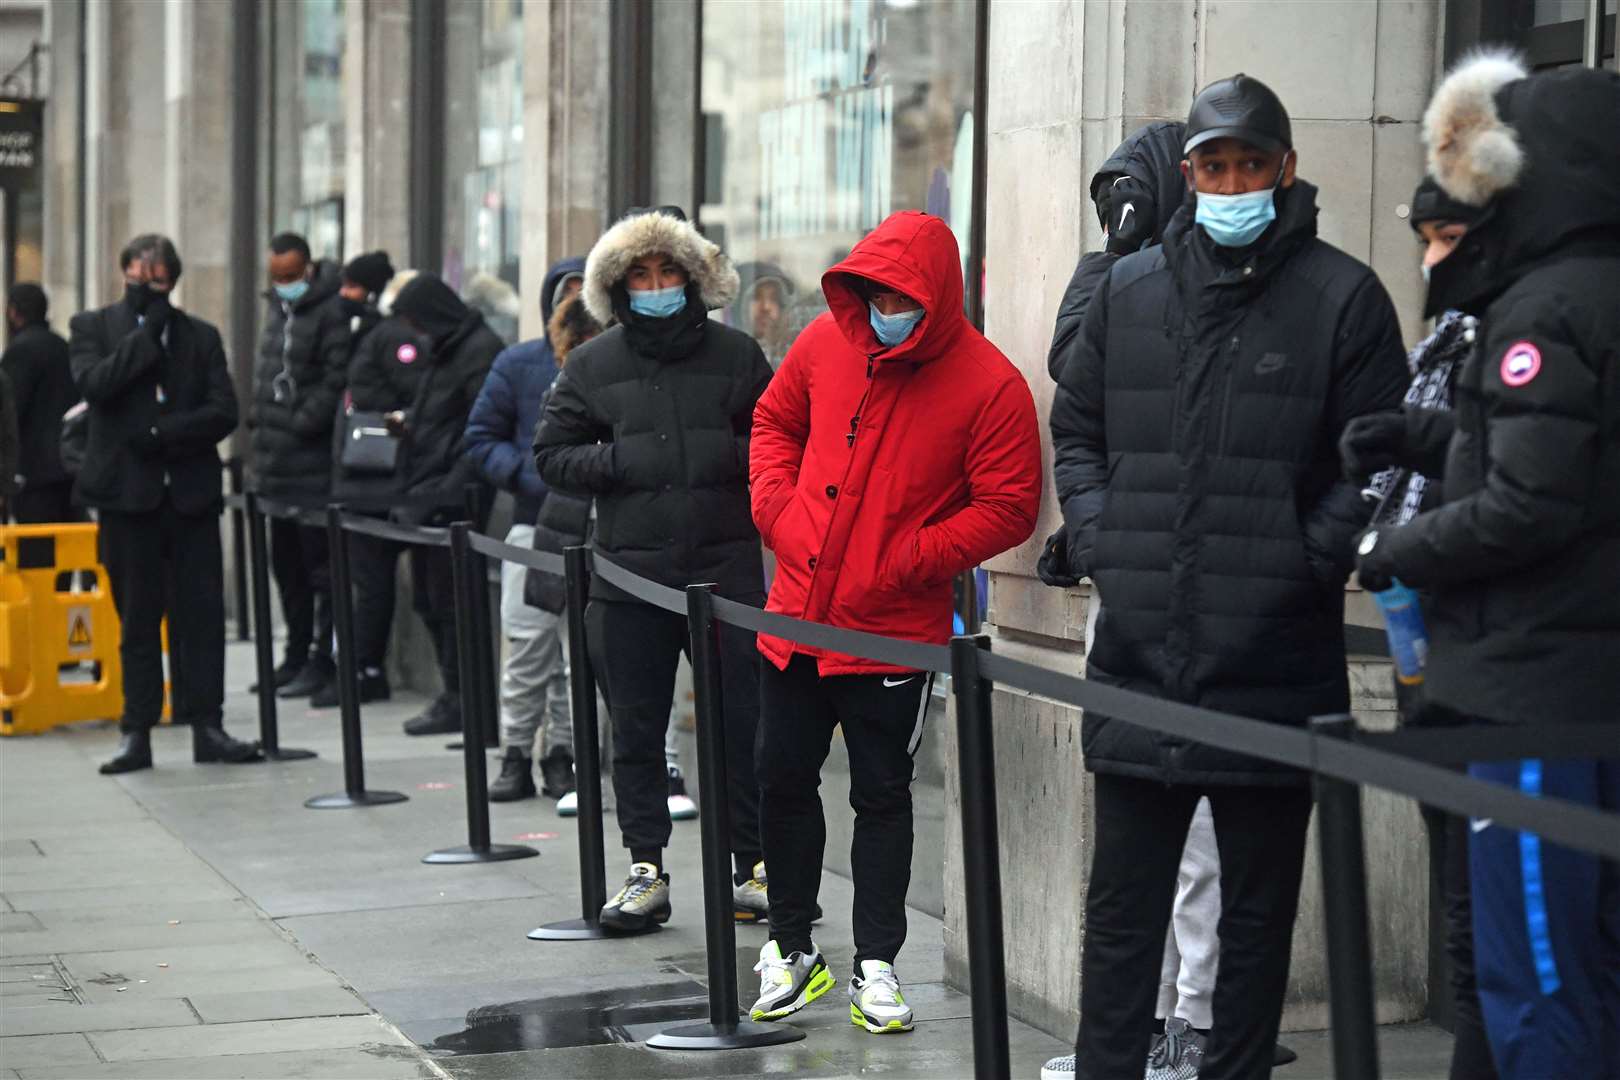 People queueing outside the Nike Town store in London’s Oxford Circus (Kirsty O’Connor/PA)